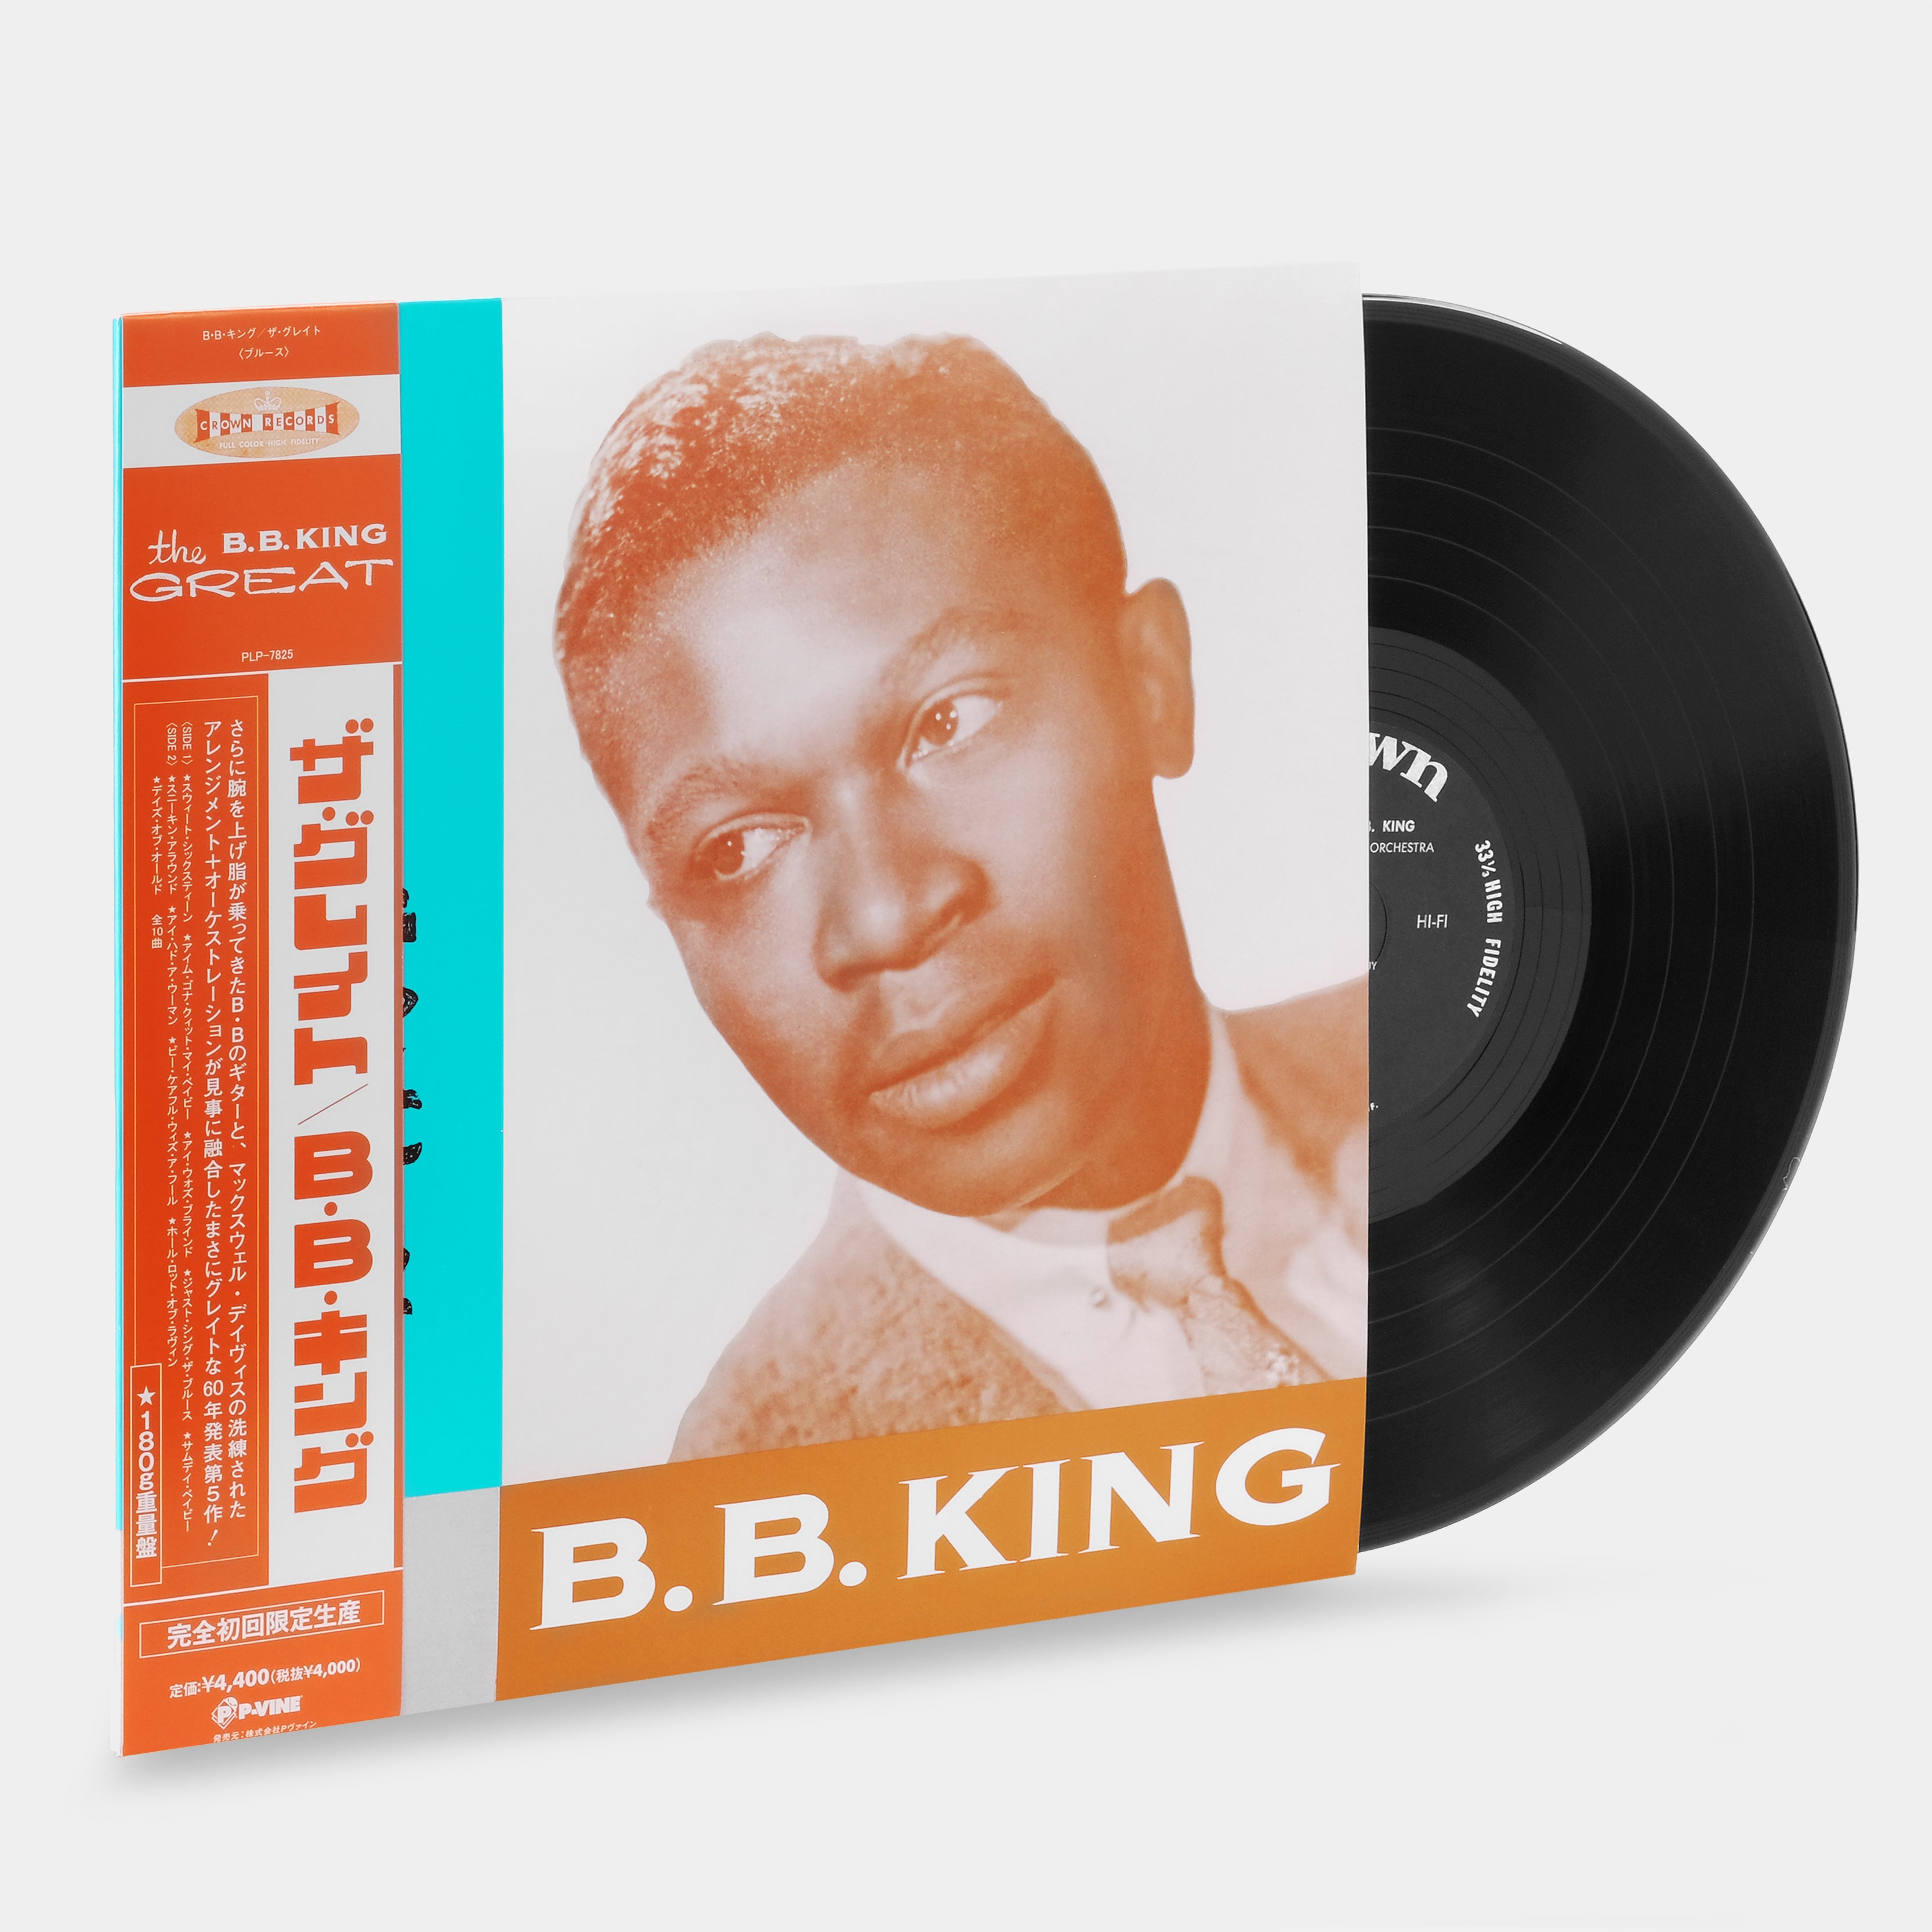 B.B. King And His Orchestra - The Great B.B. King Limited Edition LP Vinyl Record